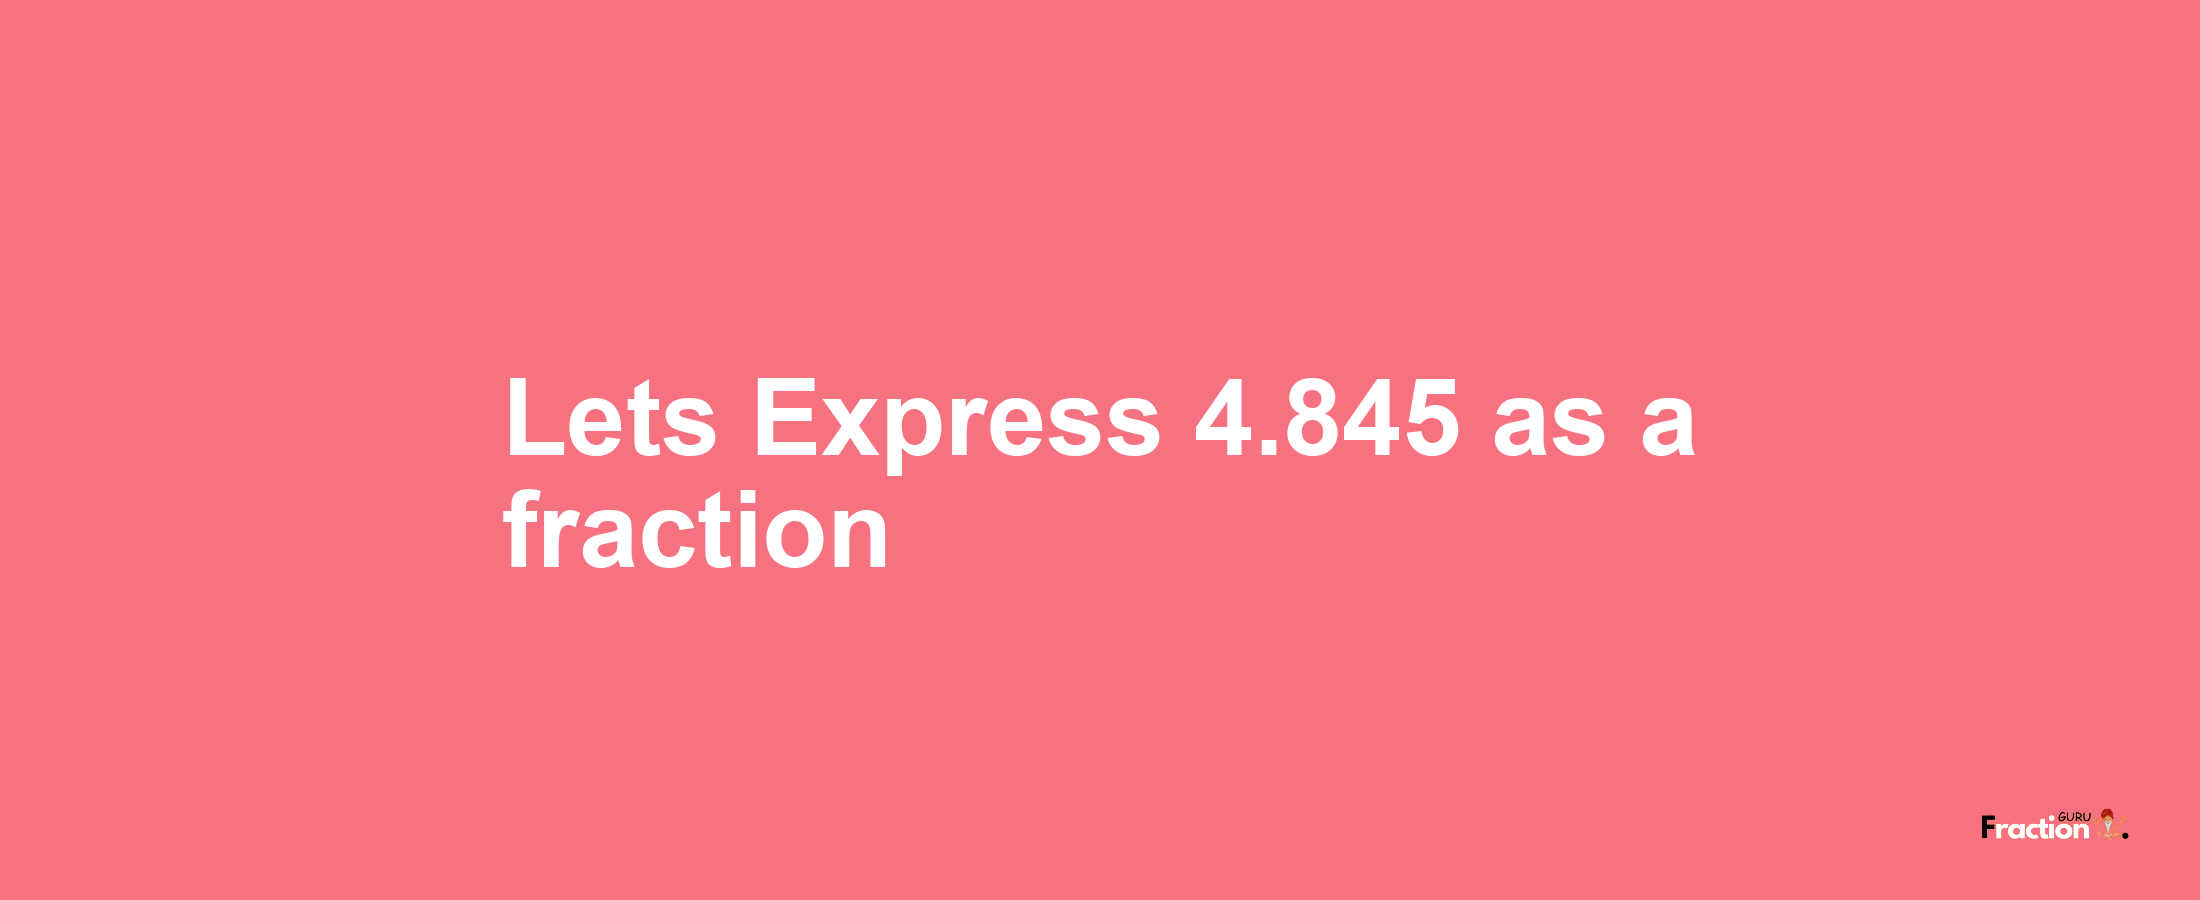 Lets Express 4.845 as afraction